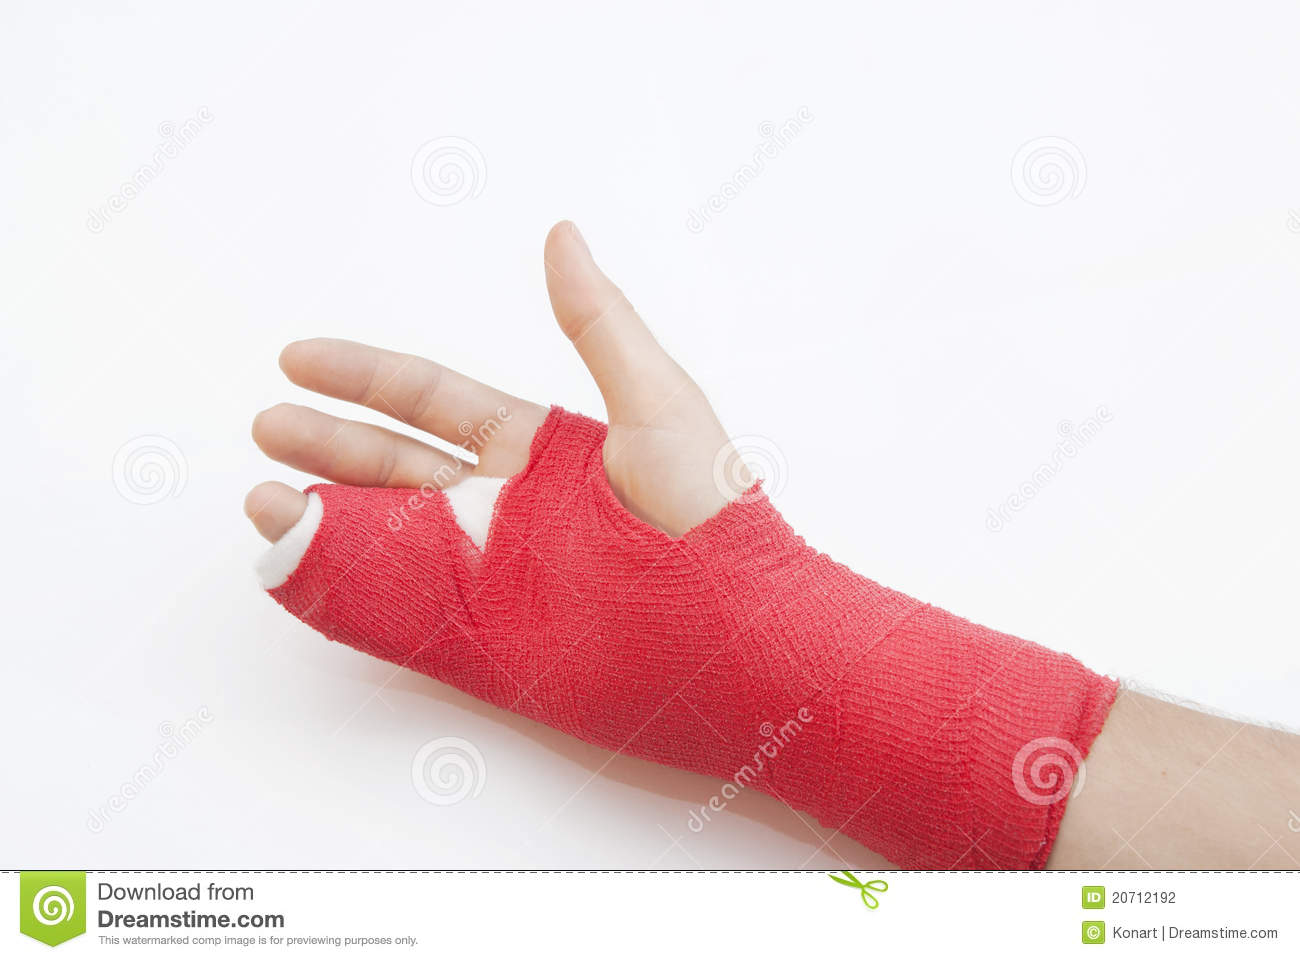 Of Broken Bone  There Is Loads Of Copyspace As The Backround Is White